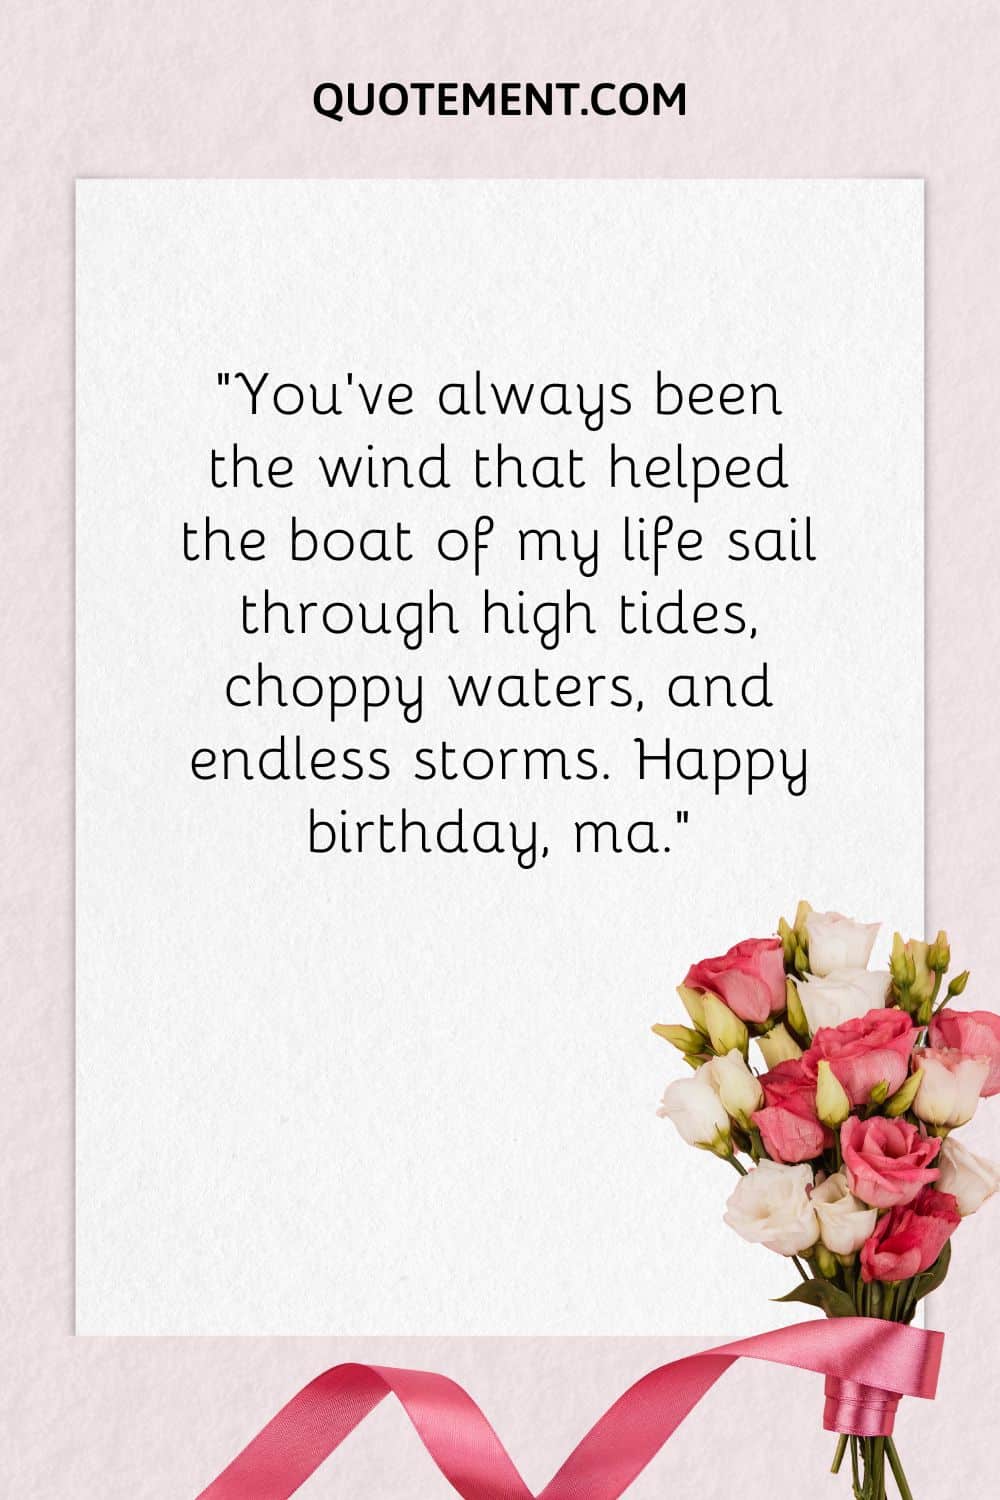 “You’ve always been the wind that helped the boat of my life sail through high tides, choppy waters, and endless storms. Happy birthday, ma.”